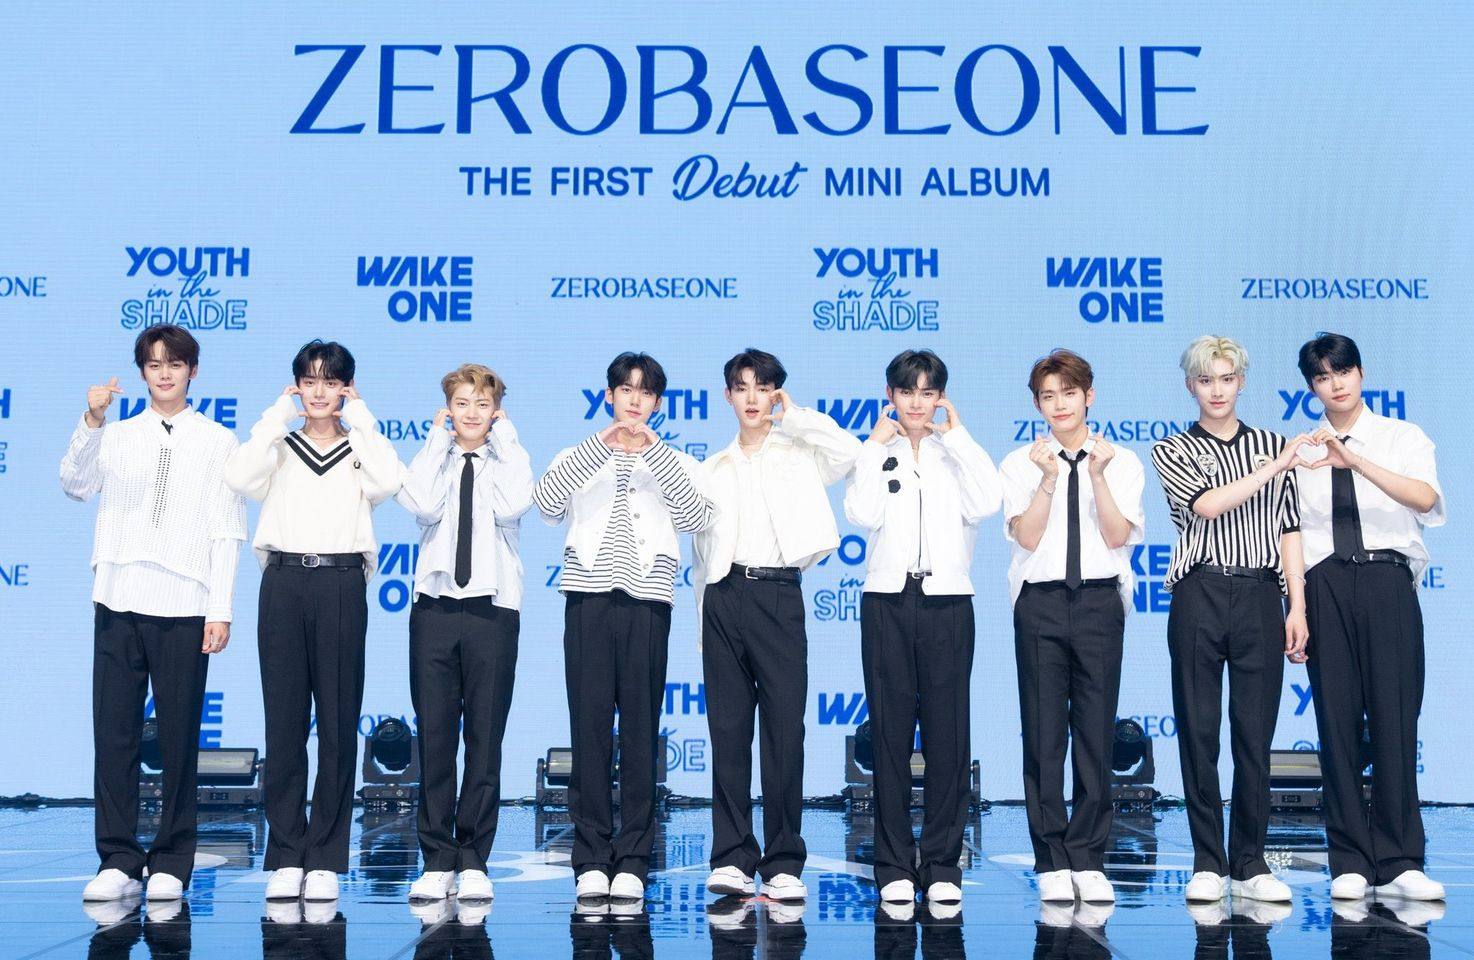 The members of rookie K-pop boy group ZeroBaseOne (ZB1) at a press event in Gwangjin district, Seoul, South Korea. They have smashed the record for most debut album pre-orders for “Youth in the Shade”. Photo: courtesy of WakeOne Entertainment